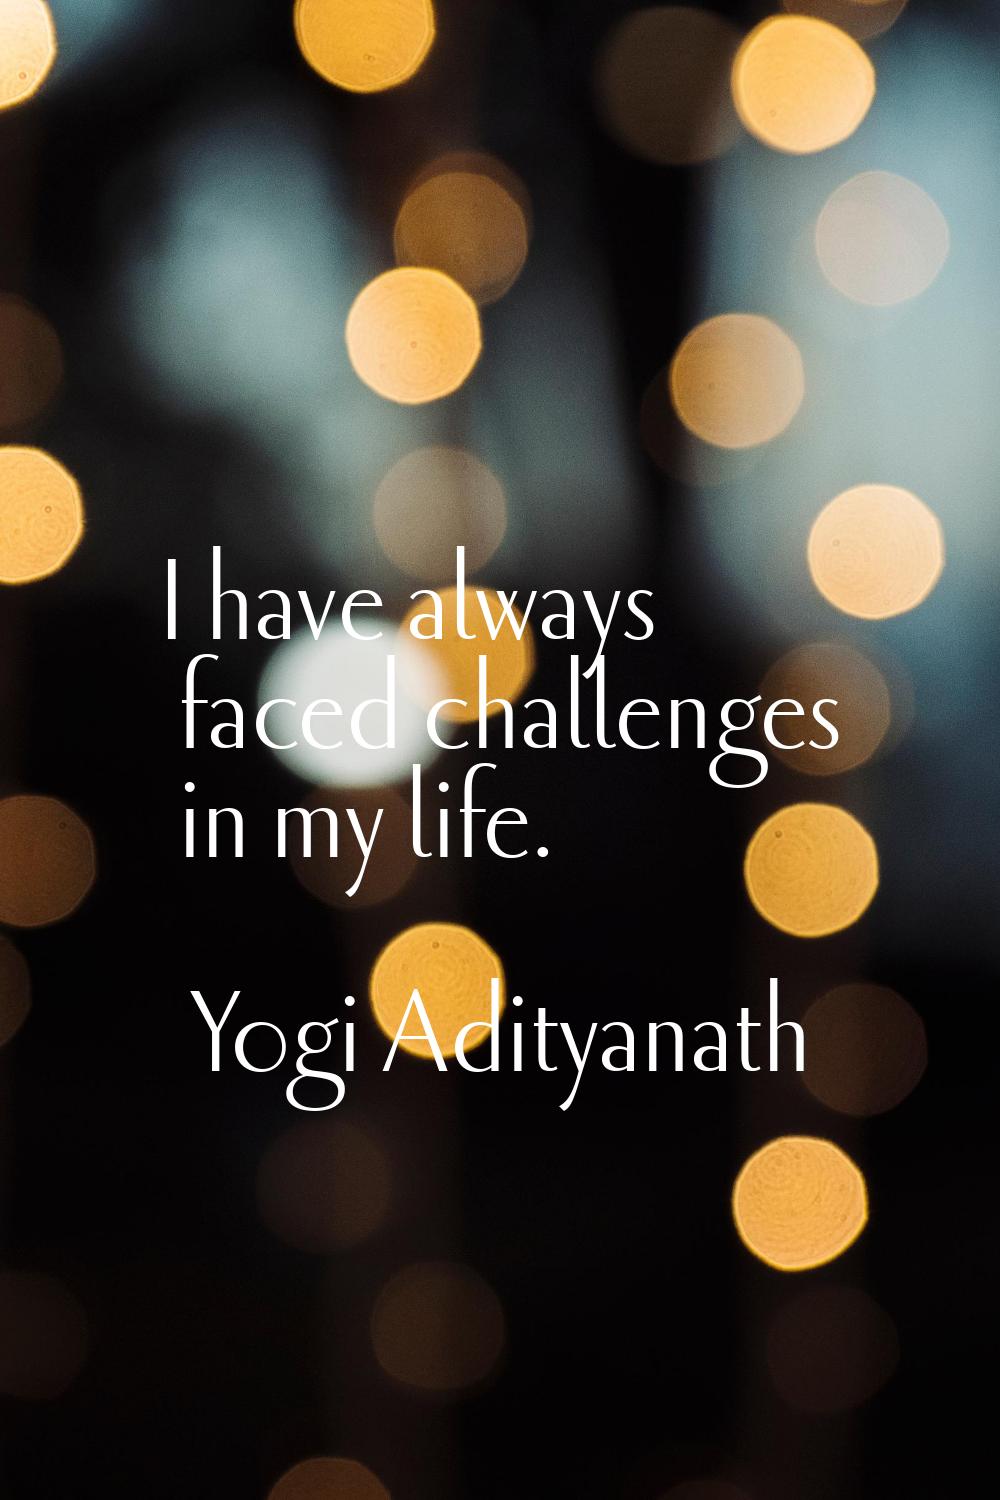 I have always faced challenges in my life.